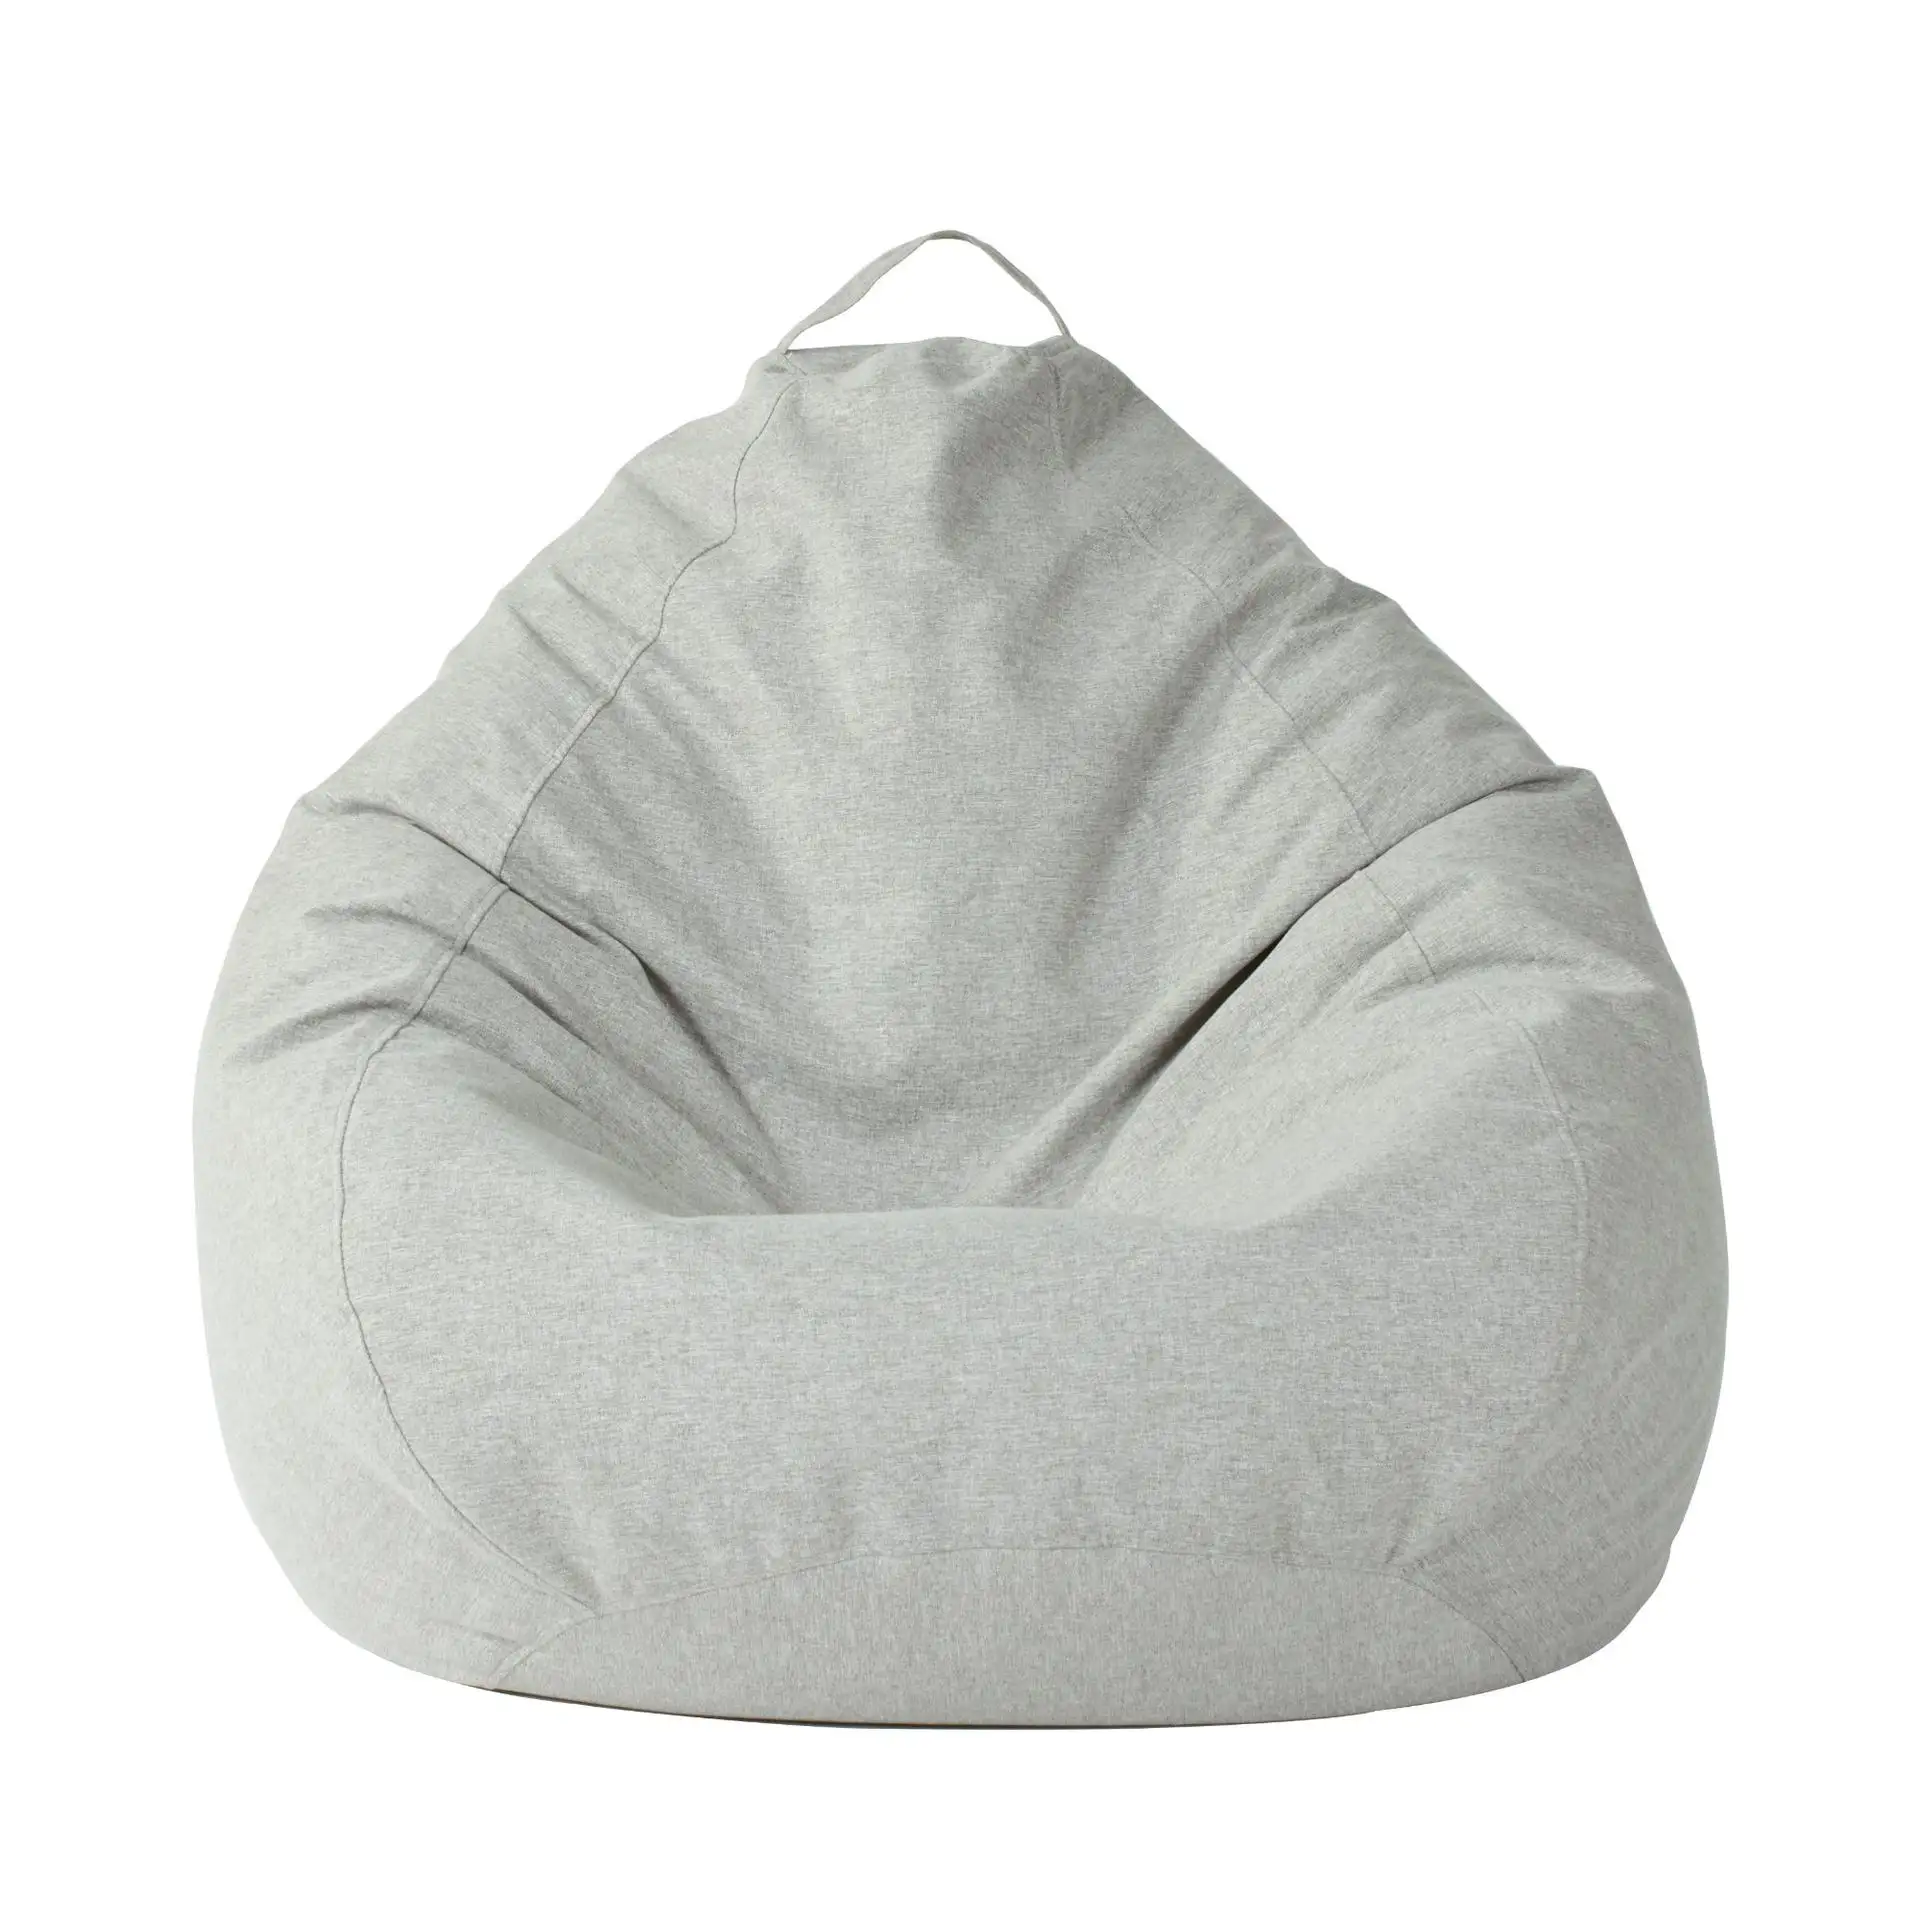 Lazy Bean Bag Waterproof Durable Custom Size Shape Color Beanbag Sofa Chair without Filler